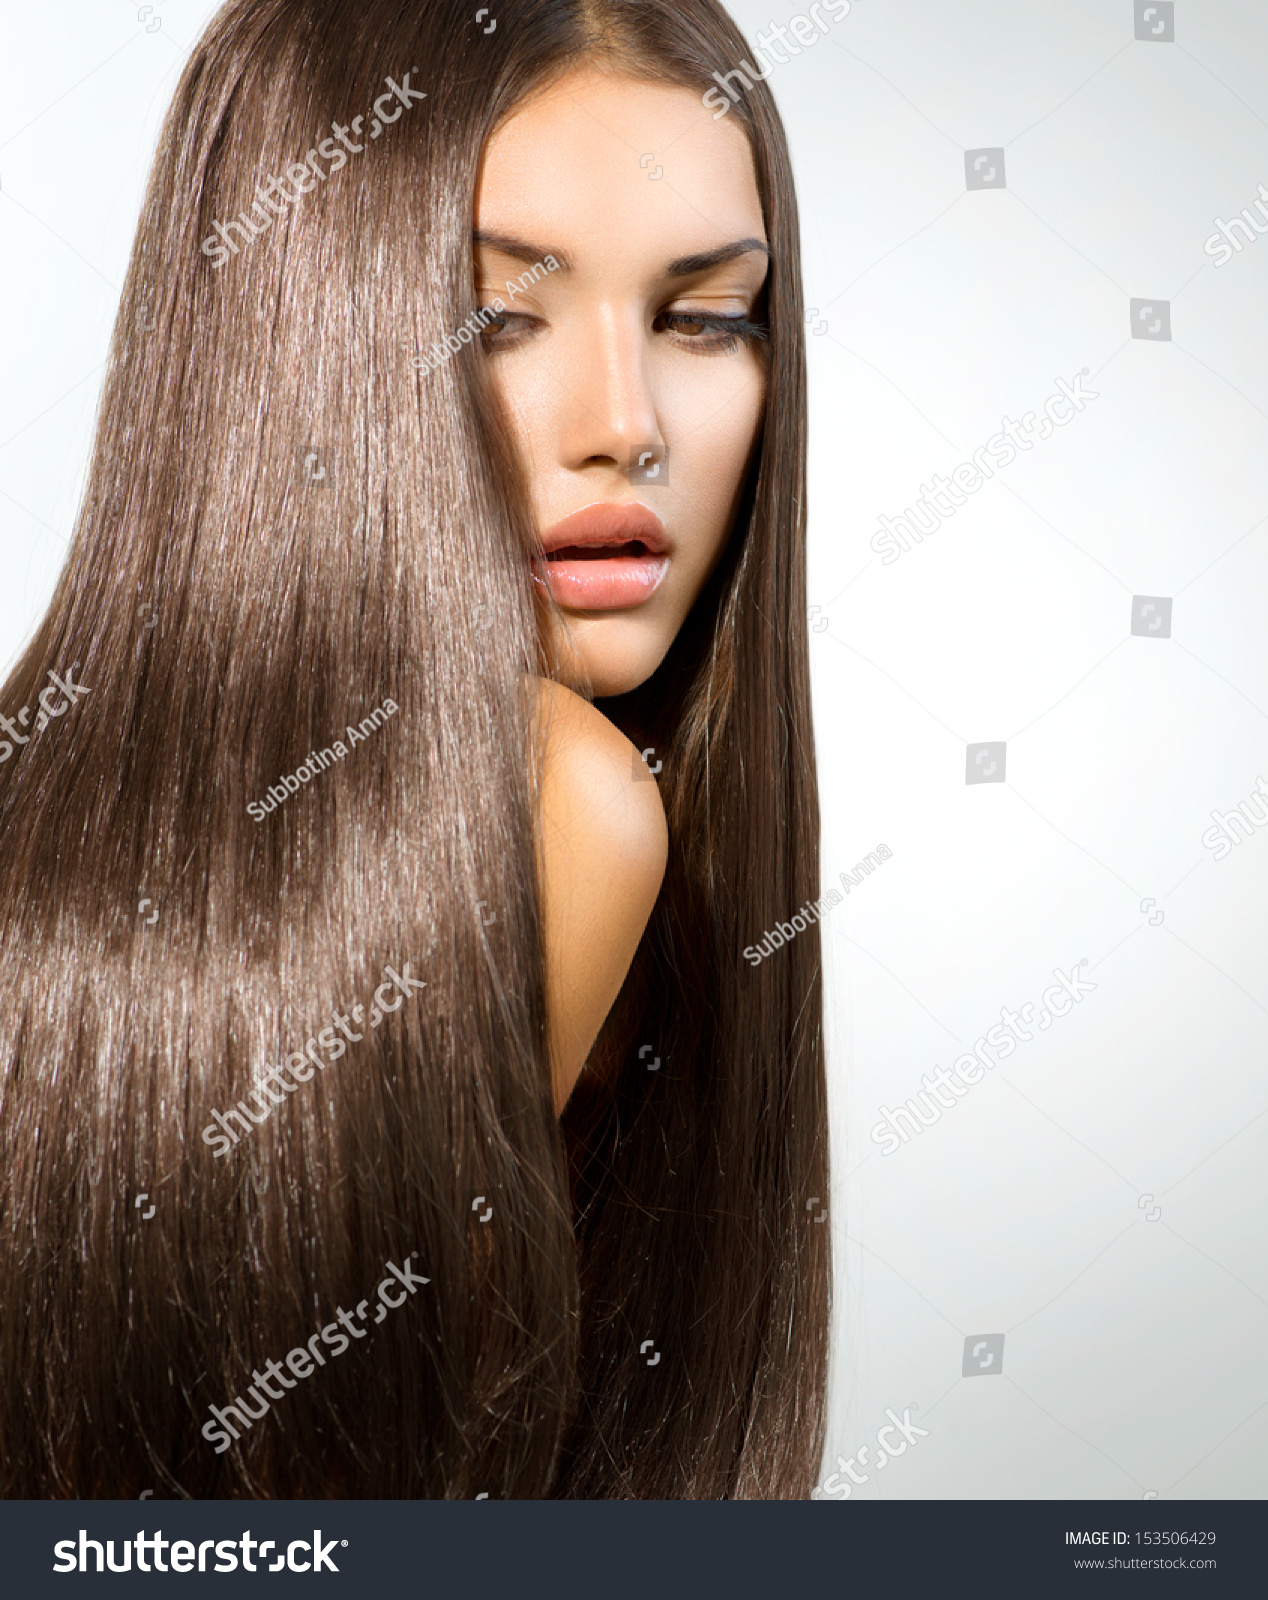 Hair Beauty Woman With Long Healthy And Shiny Smooth Brown Hair Model